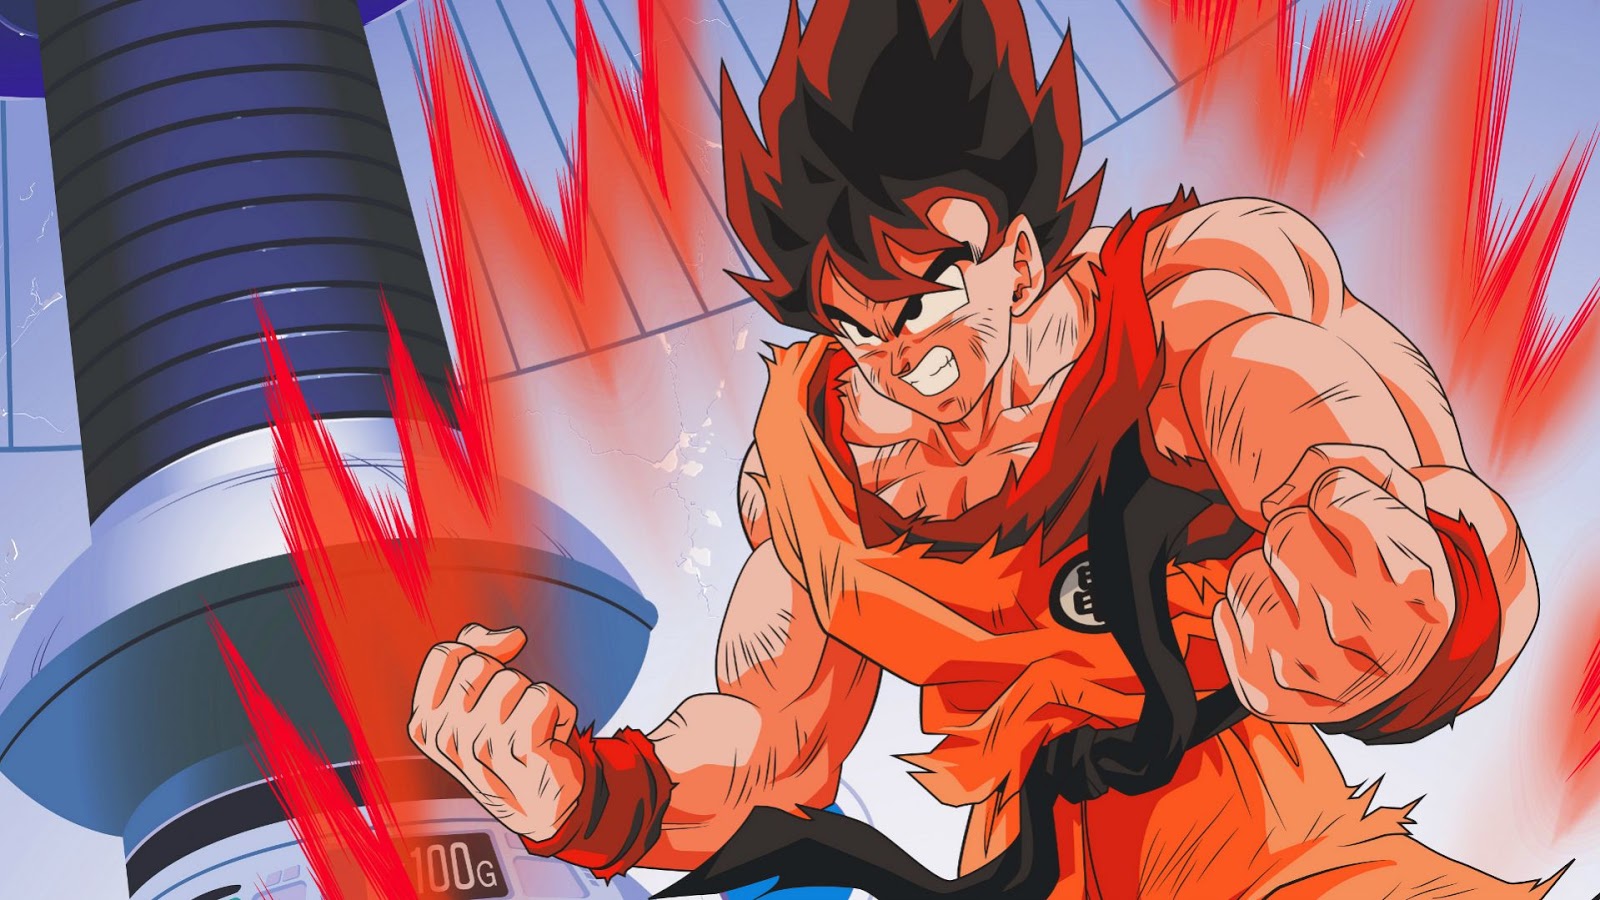 50+ HD Dragon Ball Z Wallpapers 1920x1080 (2020) - Page 5 of 5 - We 7